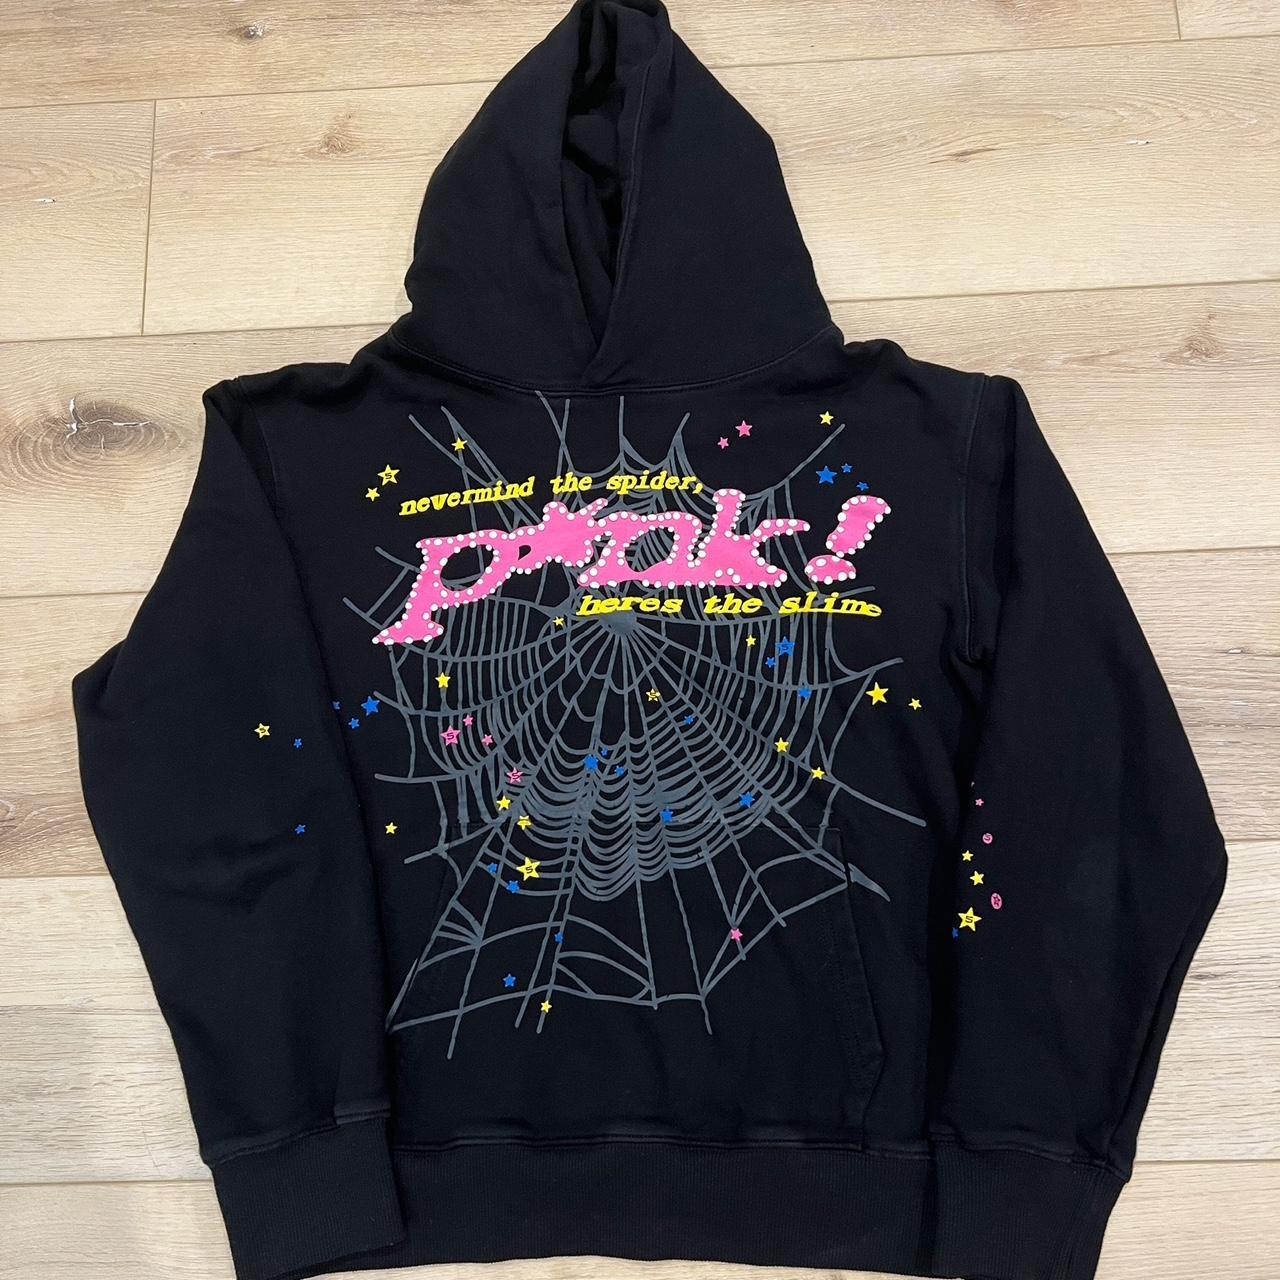 Spider Worldwide P*nk Hoodie Size S fits small - Depop